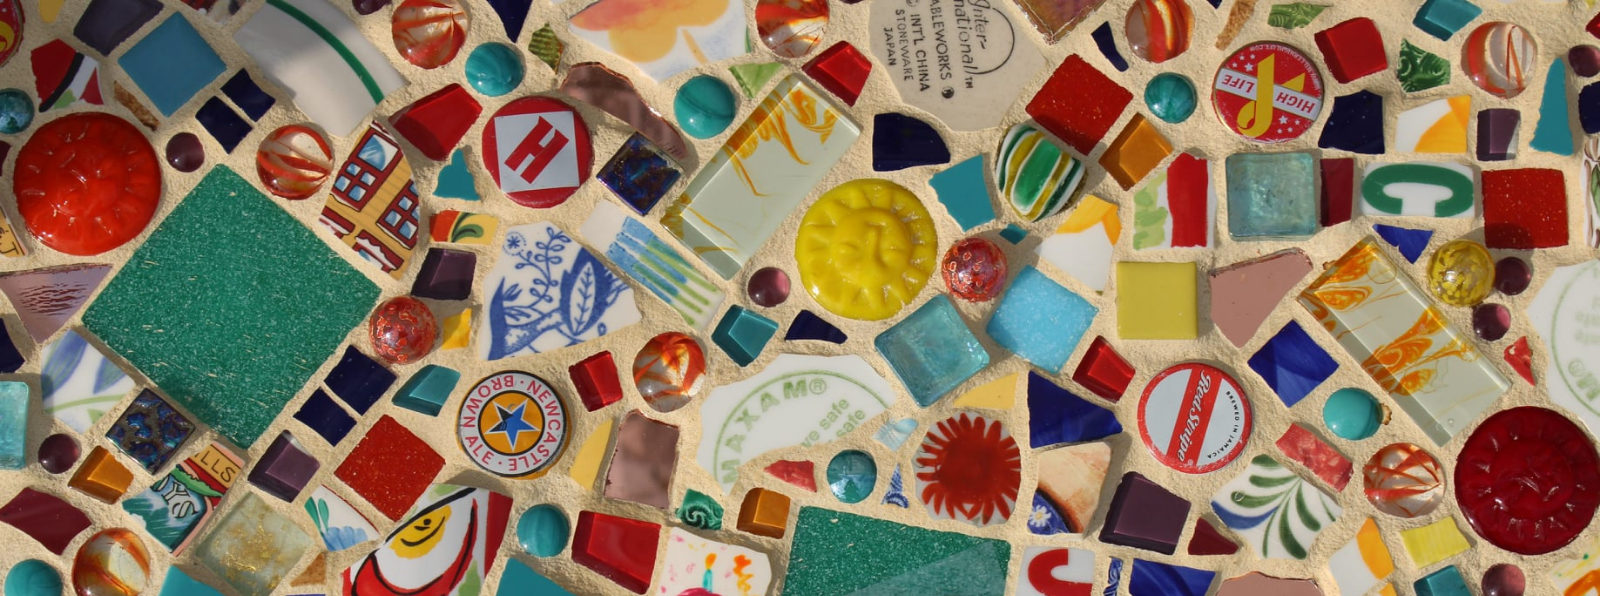 A mosaic featuring different objects and materials.